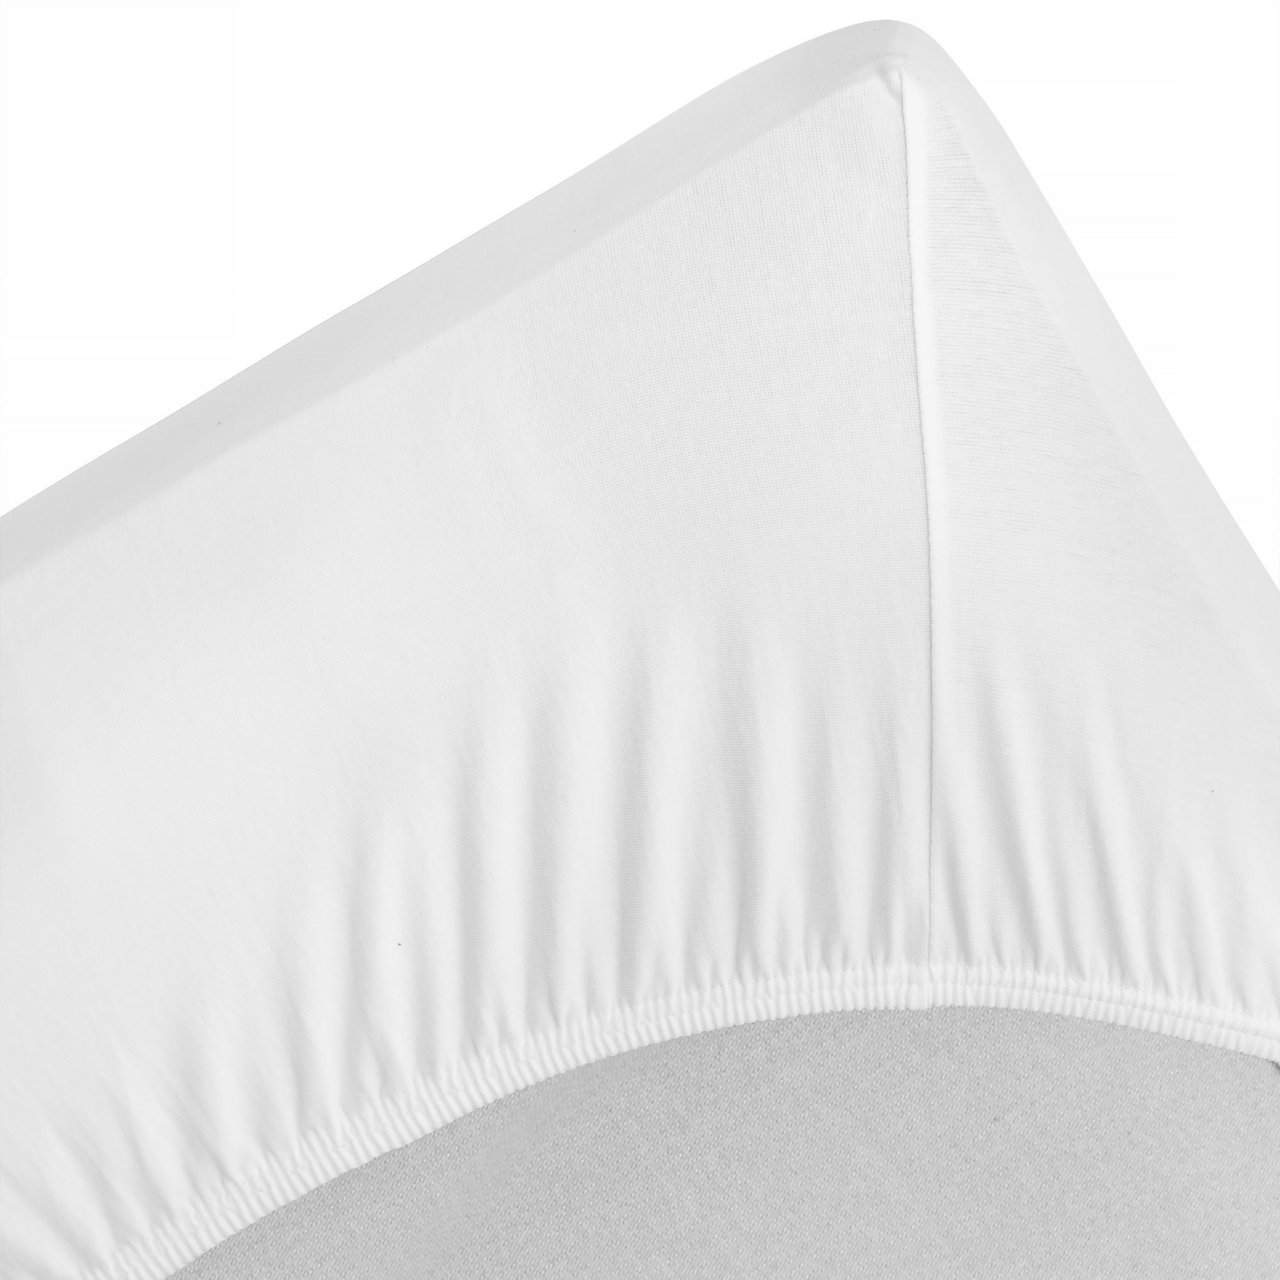 Mattress cover, fitted sheet 180x200 cm, White